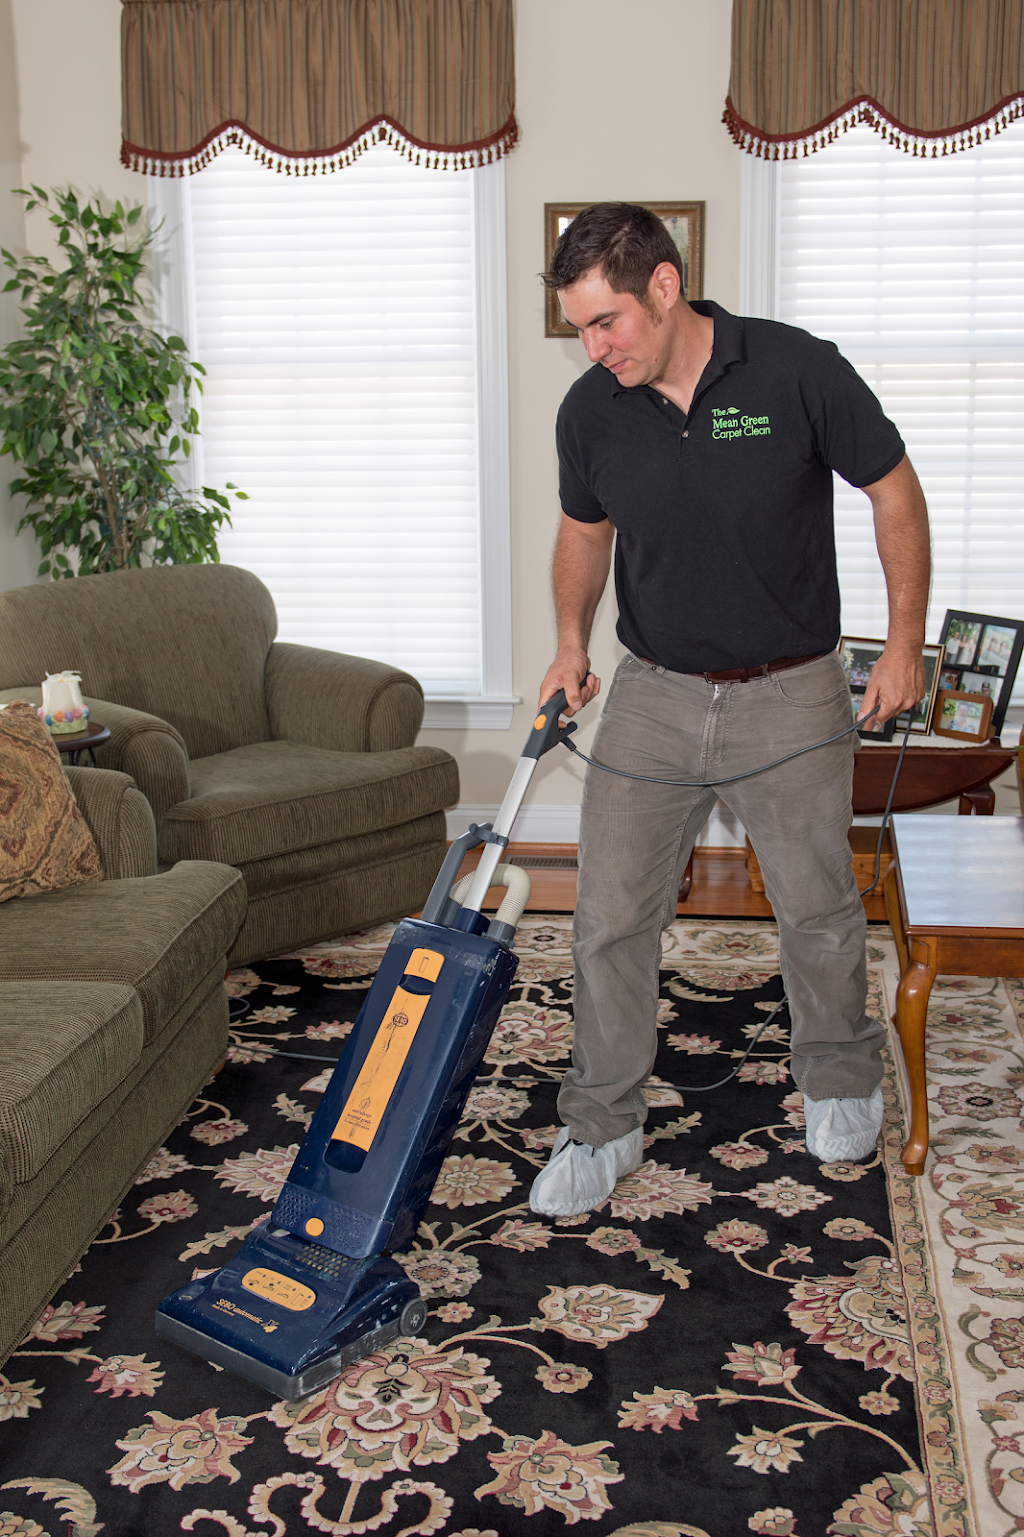 The Mean Green Carpet Clean | 808 Tanley Rd, Silver Spring, MD 20904 | Phone: (240) 472-1144